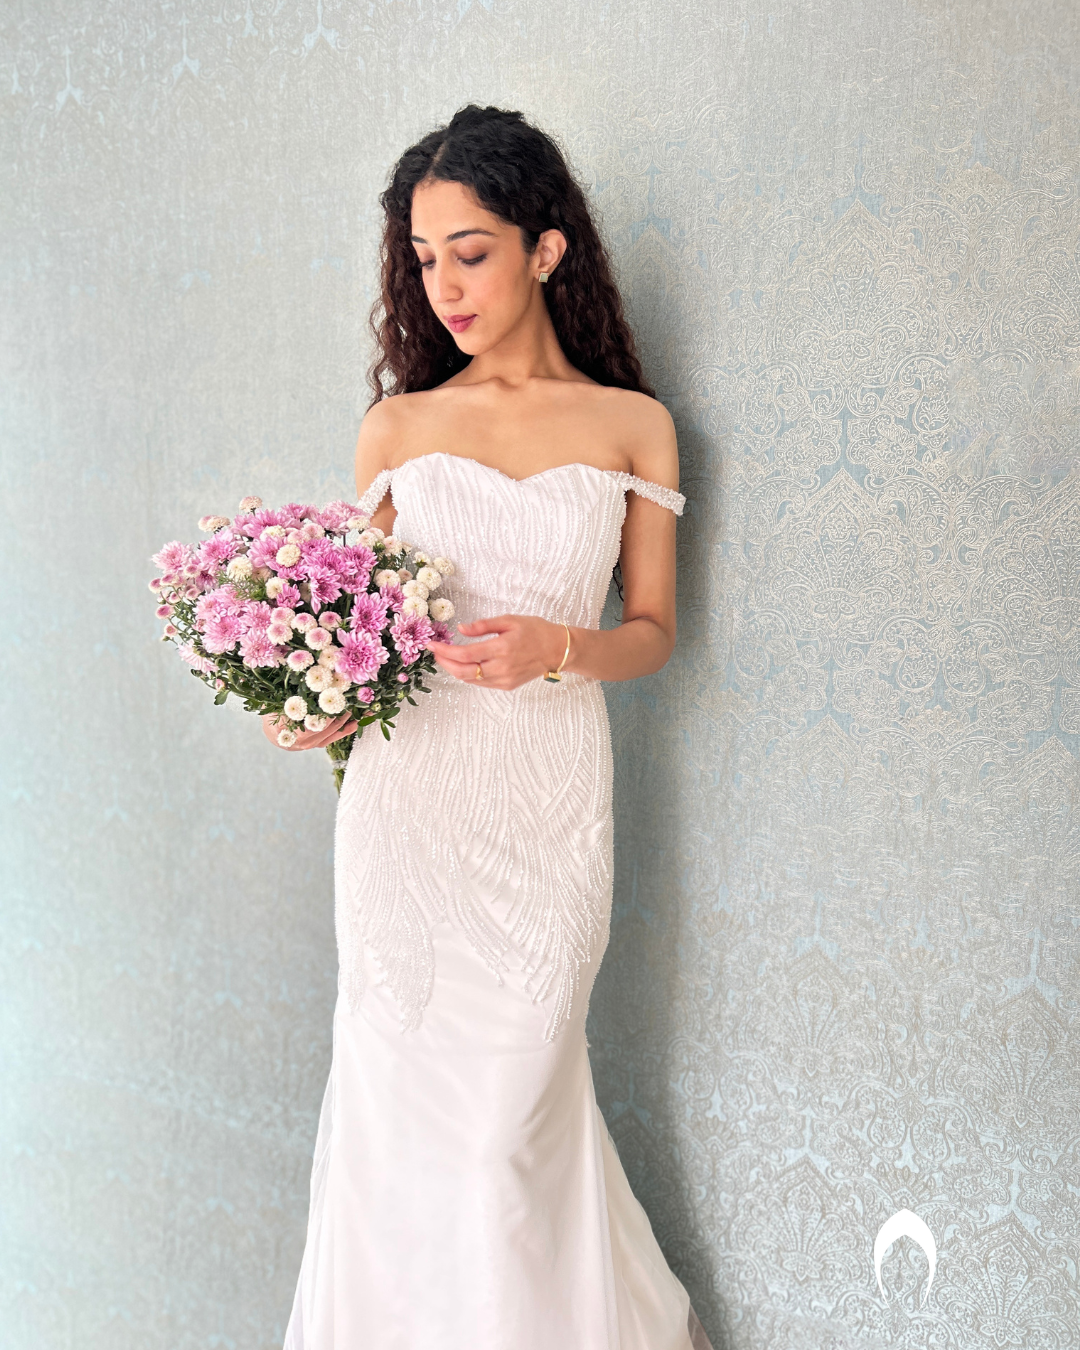 Signature christian bridal mermaid off shoulder gown with embellished net